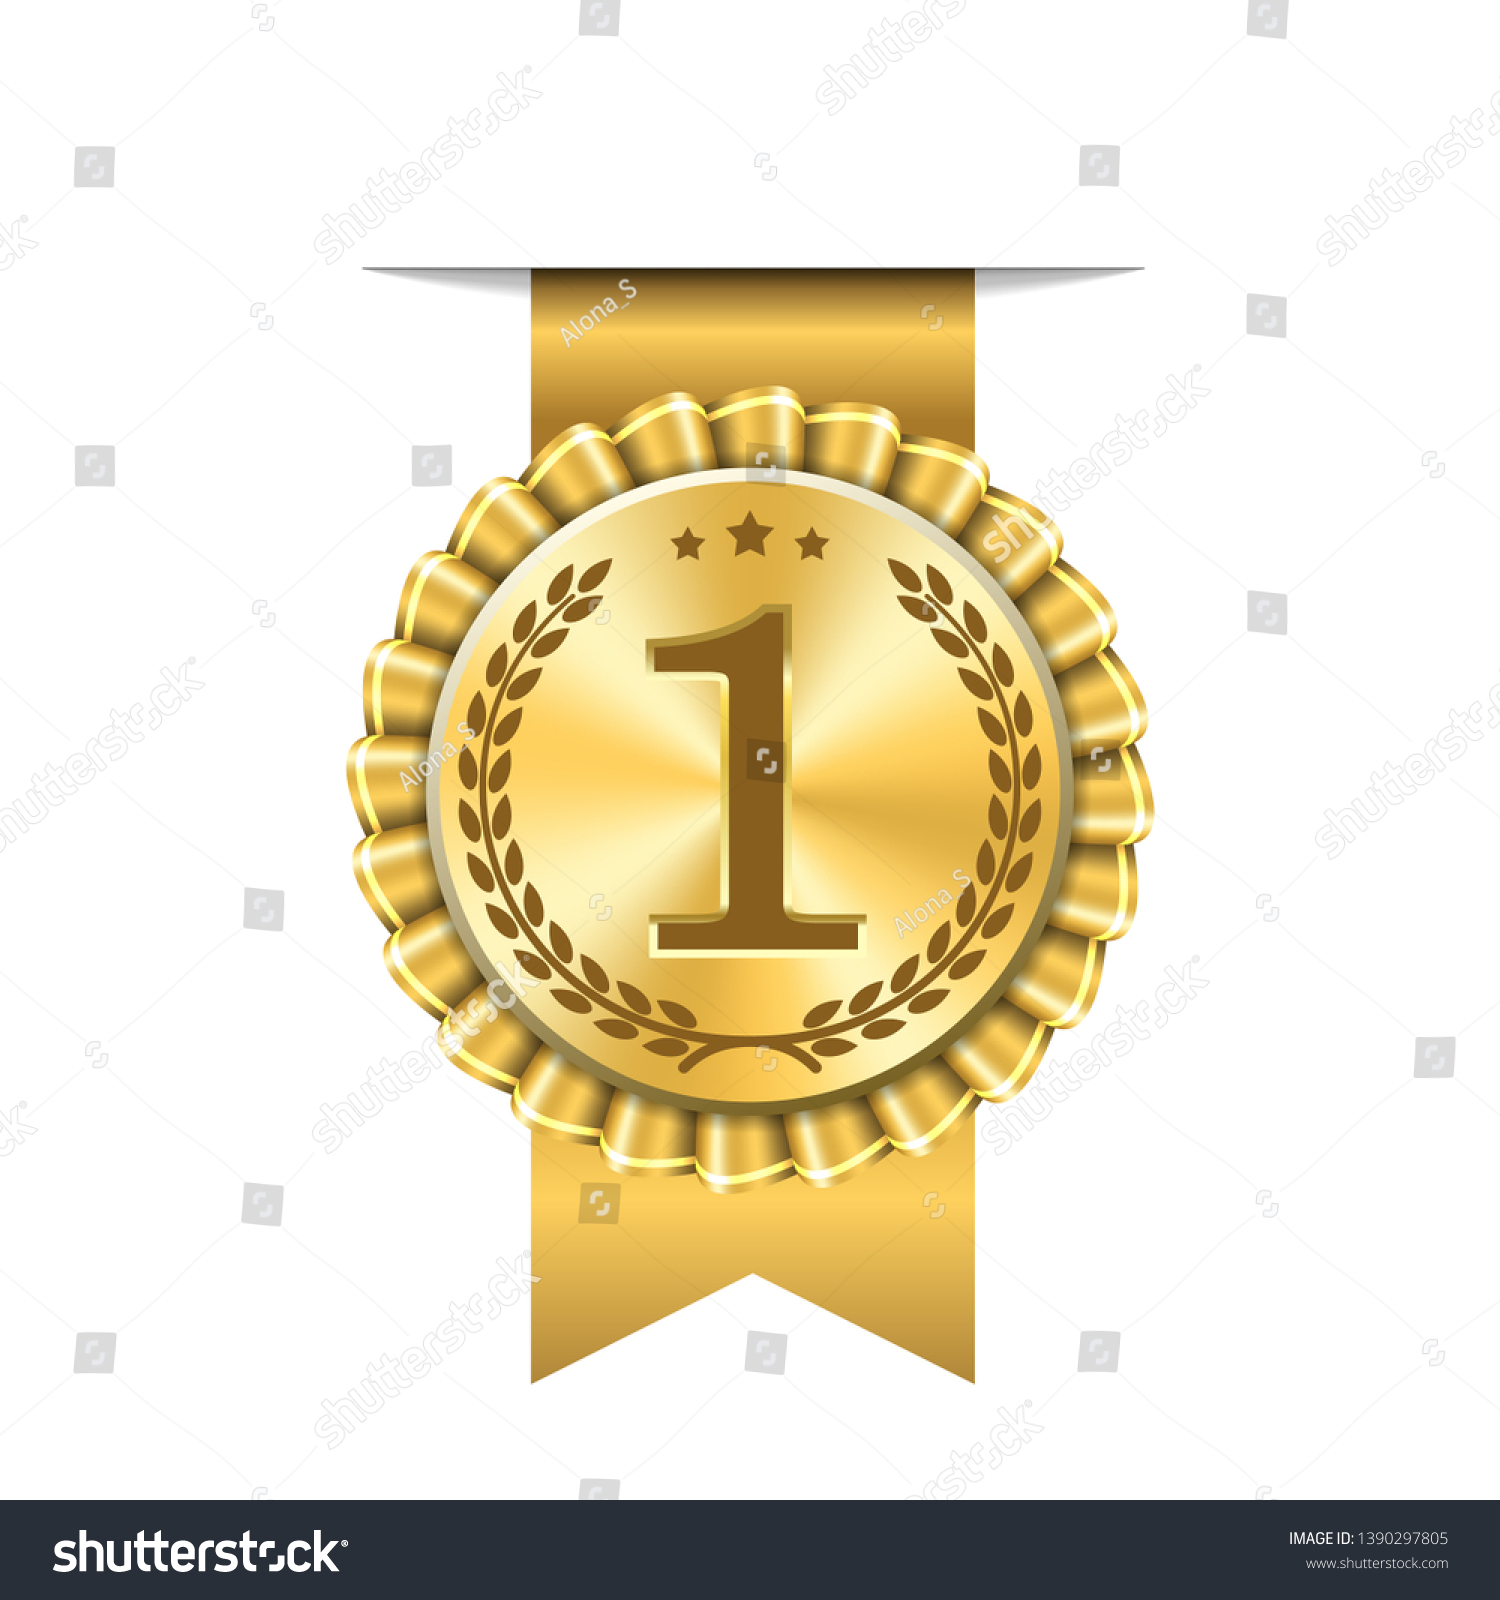 Award ribbon gold icon number first. Design winner golden medal 1 prize. Symbol best trophy, 1st success champion, one sport competition honor, achievement leadership, victory Vector illustration